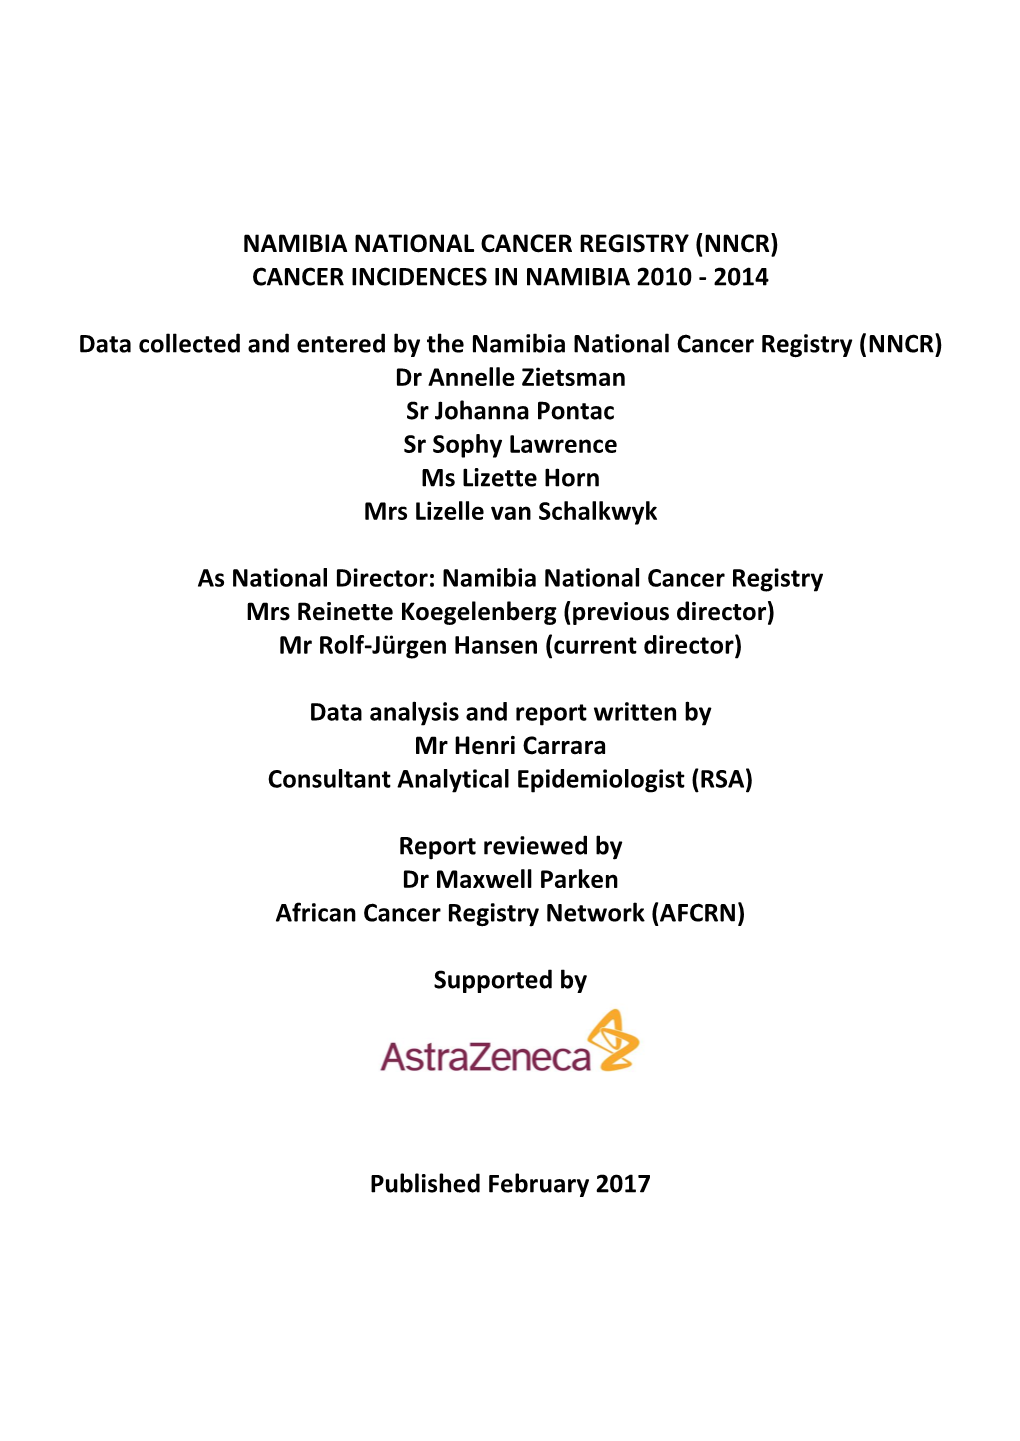 Cancer Incidence in Namibia 2010